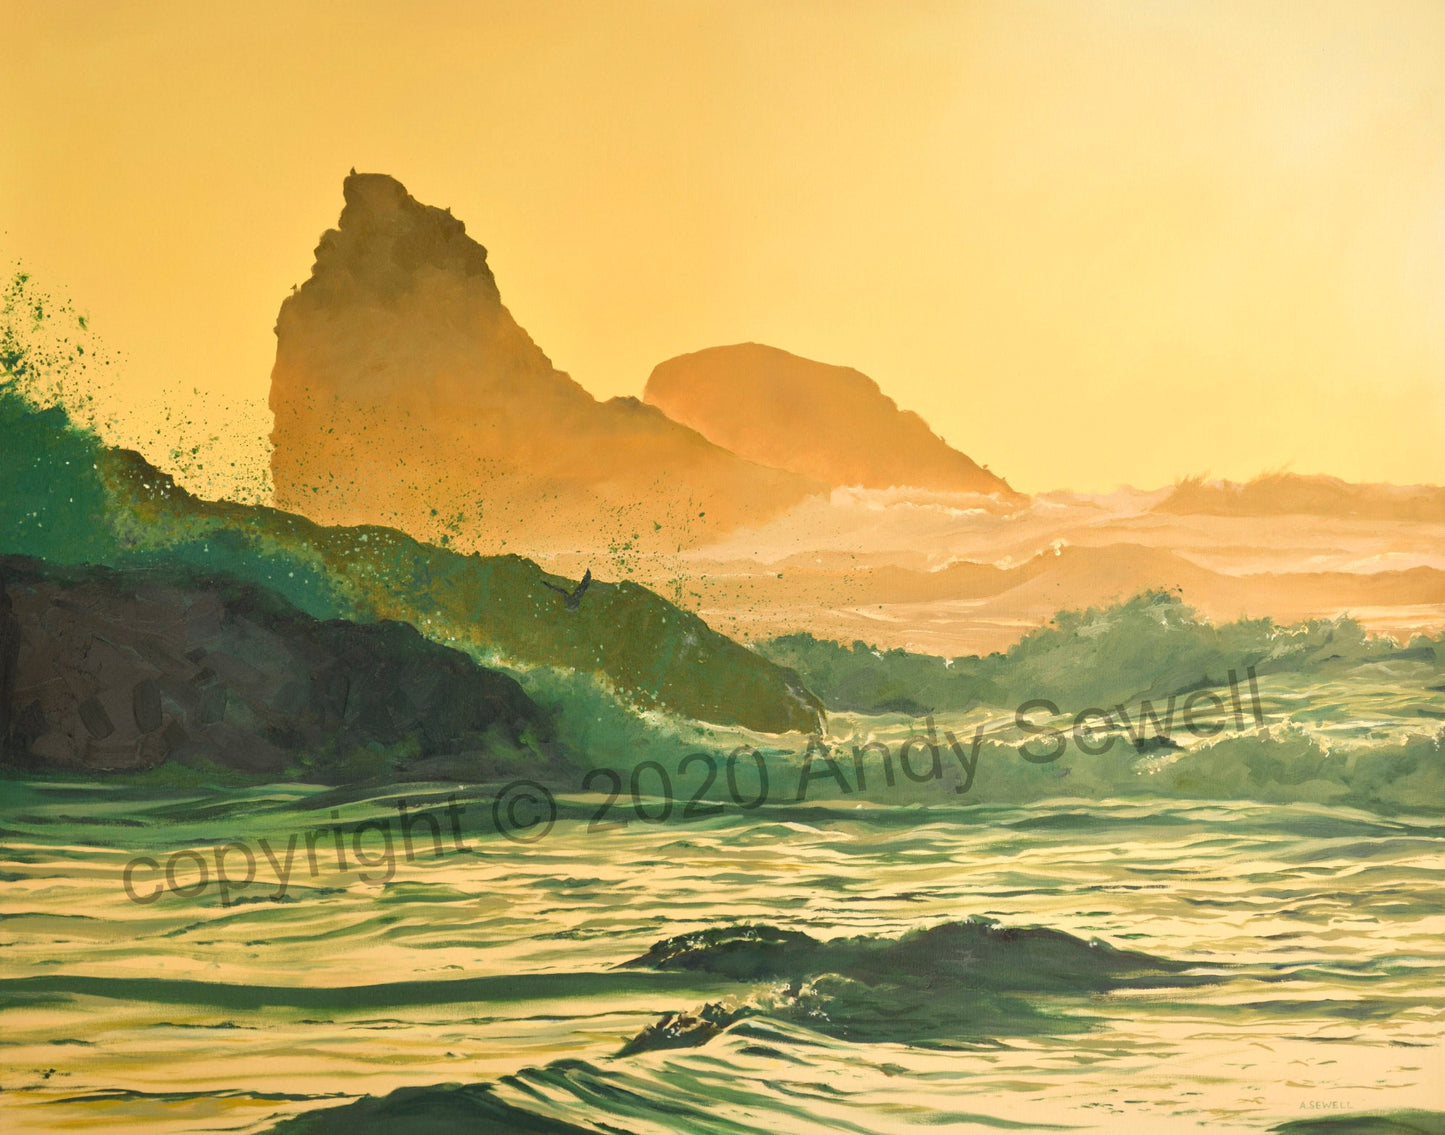 "Evening Waves" -48"x38" an Original oil painting or Giclee Reprod.